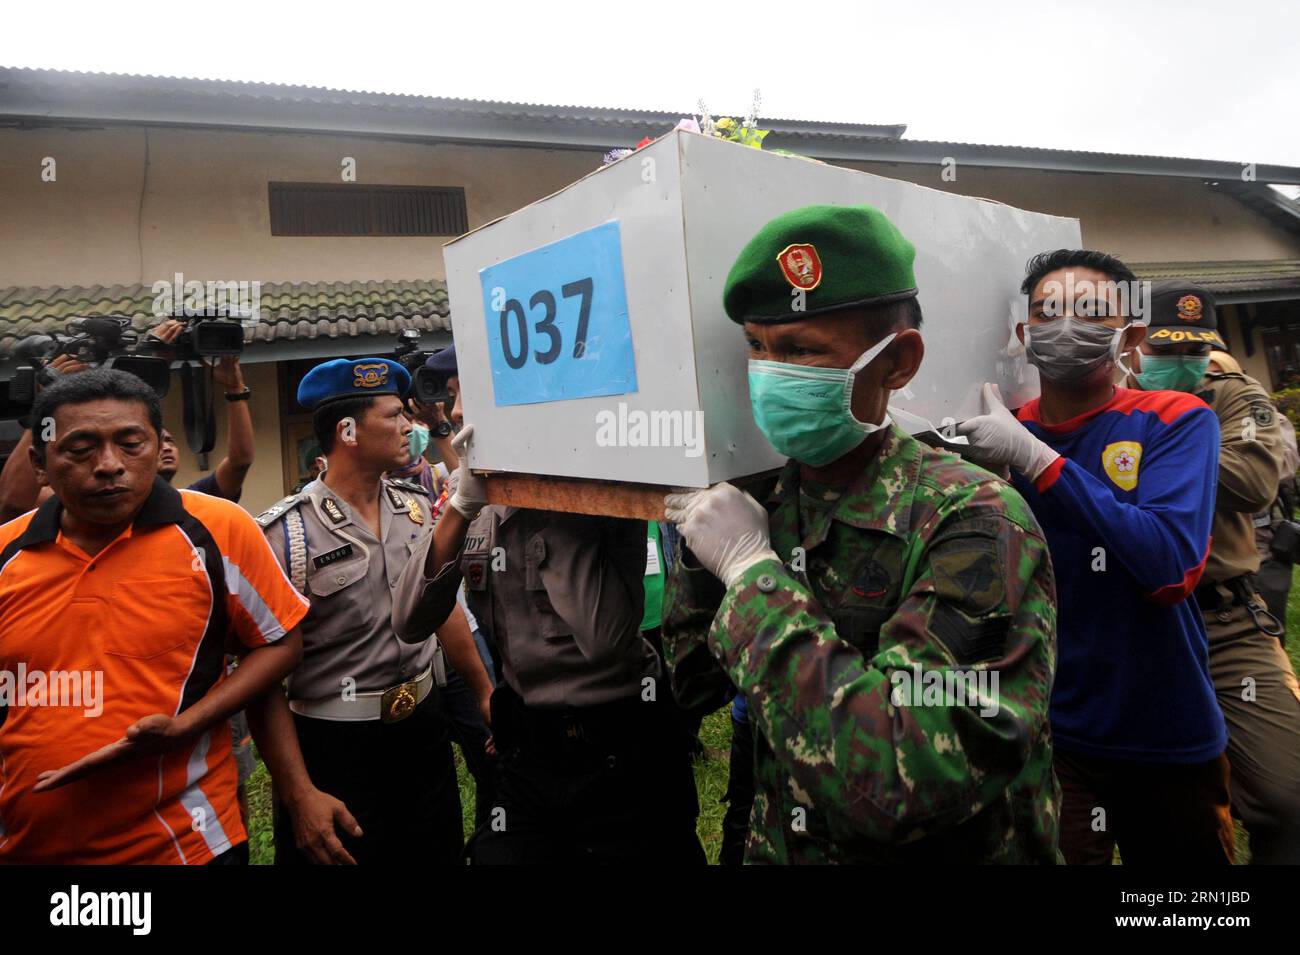 AKTUELLES ZEITGESCHEHEN Absturz von AirAsia-Flug QZ8501 - Transport von Leichen nach Pangkalan Bun (150105) -- PANGKALAN BUN, Jan. 5. 2015 -- Indonesian military personnel and volunteers carry a coffin containing the body of a victim of AirAsia flight QZ8501 to an ambulance in Pangkalan Bun, Indonesia. Jan. 5, 2015. Three bodies of AirAsia crash victims were delivered to Indonesia s AirAsia search center by a helicopter operated by Indonesian National Search and Rescue agency (BASARNAS) on Monday, making the number of bodies sent to the evacuation command post reached 37. ) INDONESIA-PANGKALAN Stock Photo